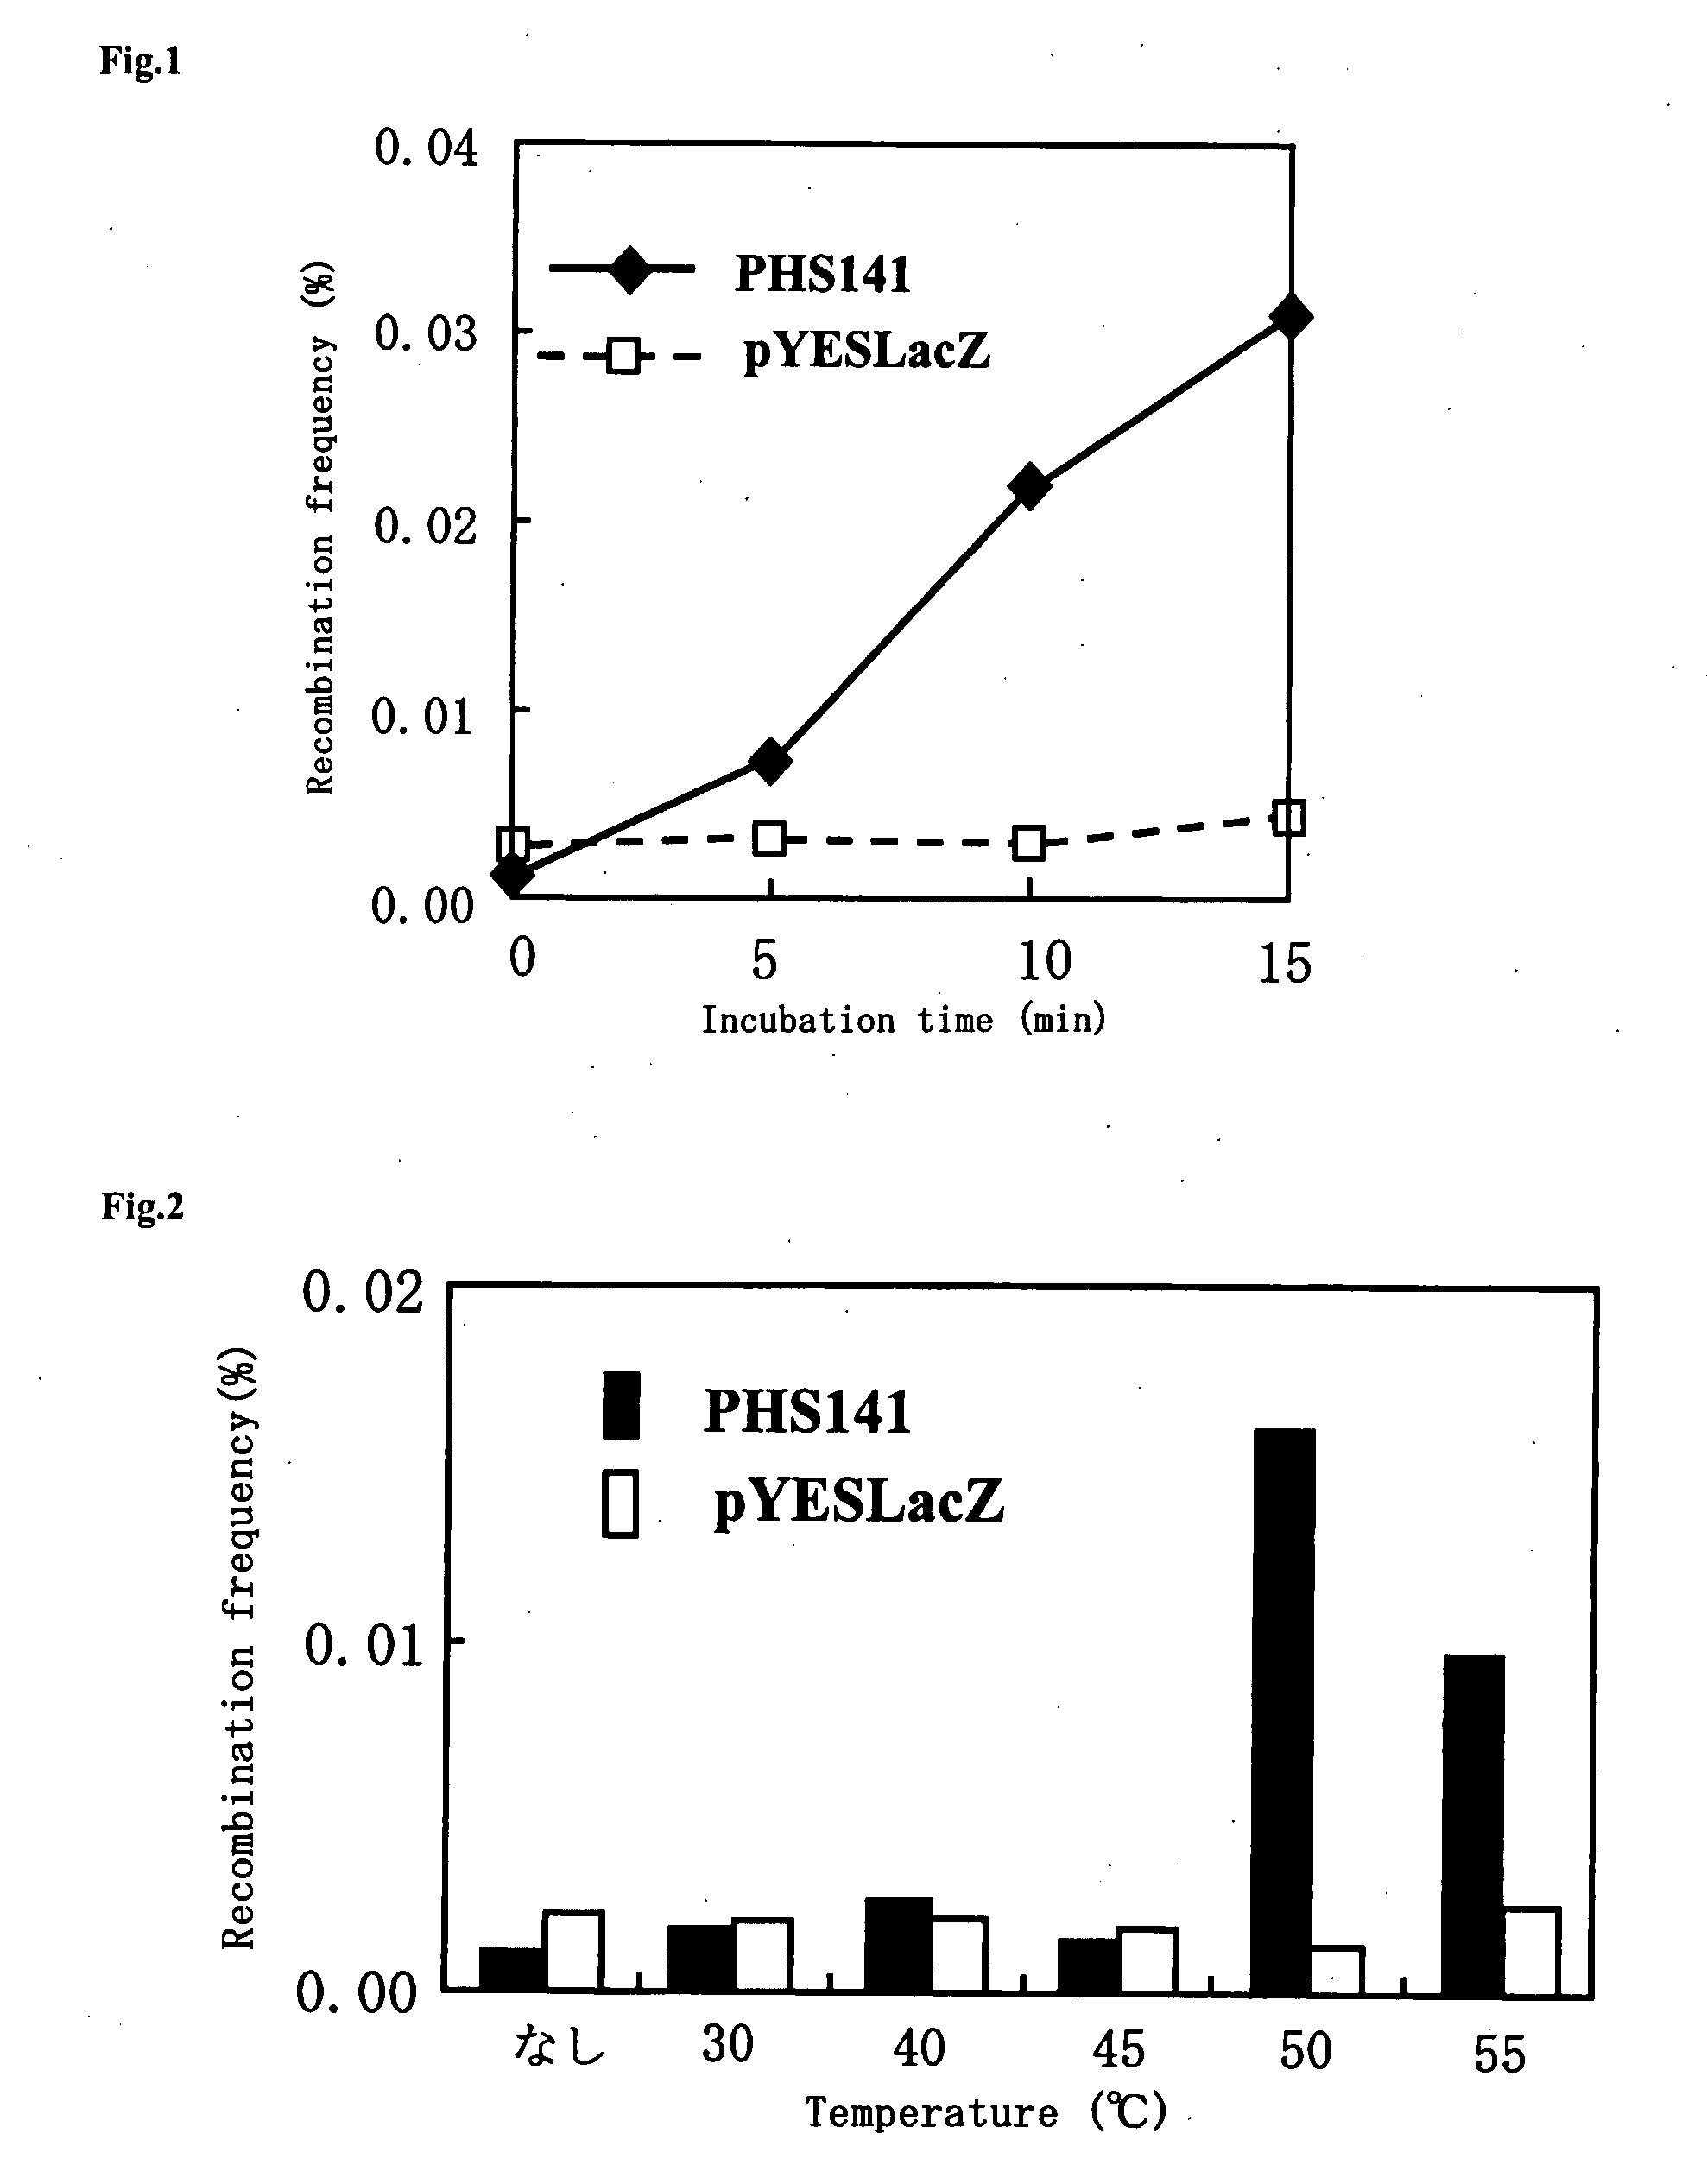 Method of Inducing Genome Reorganization Via Intracellular Activation of Thermostable Multifrequency Dna-Cleaving Enzyme